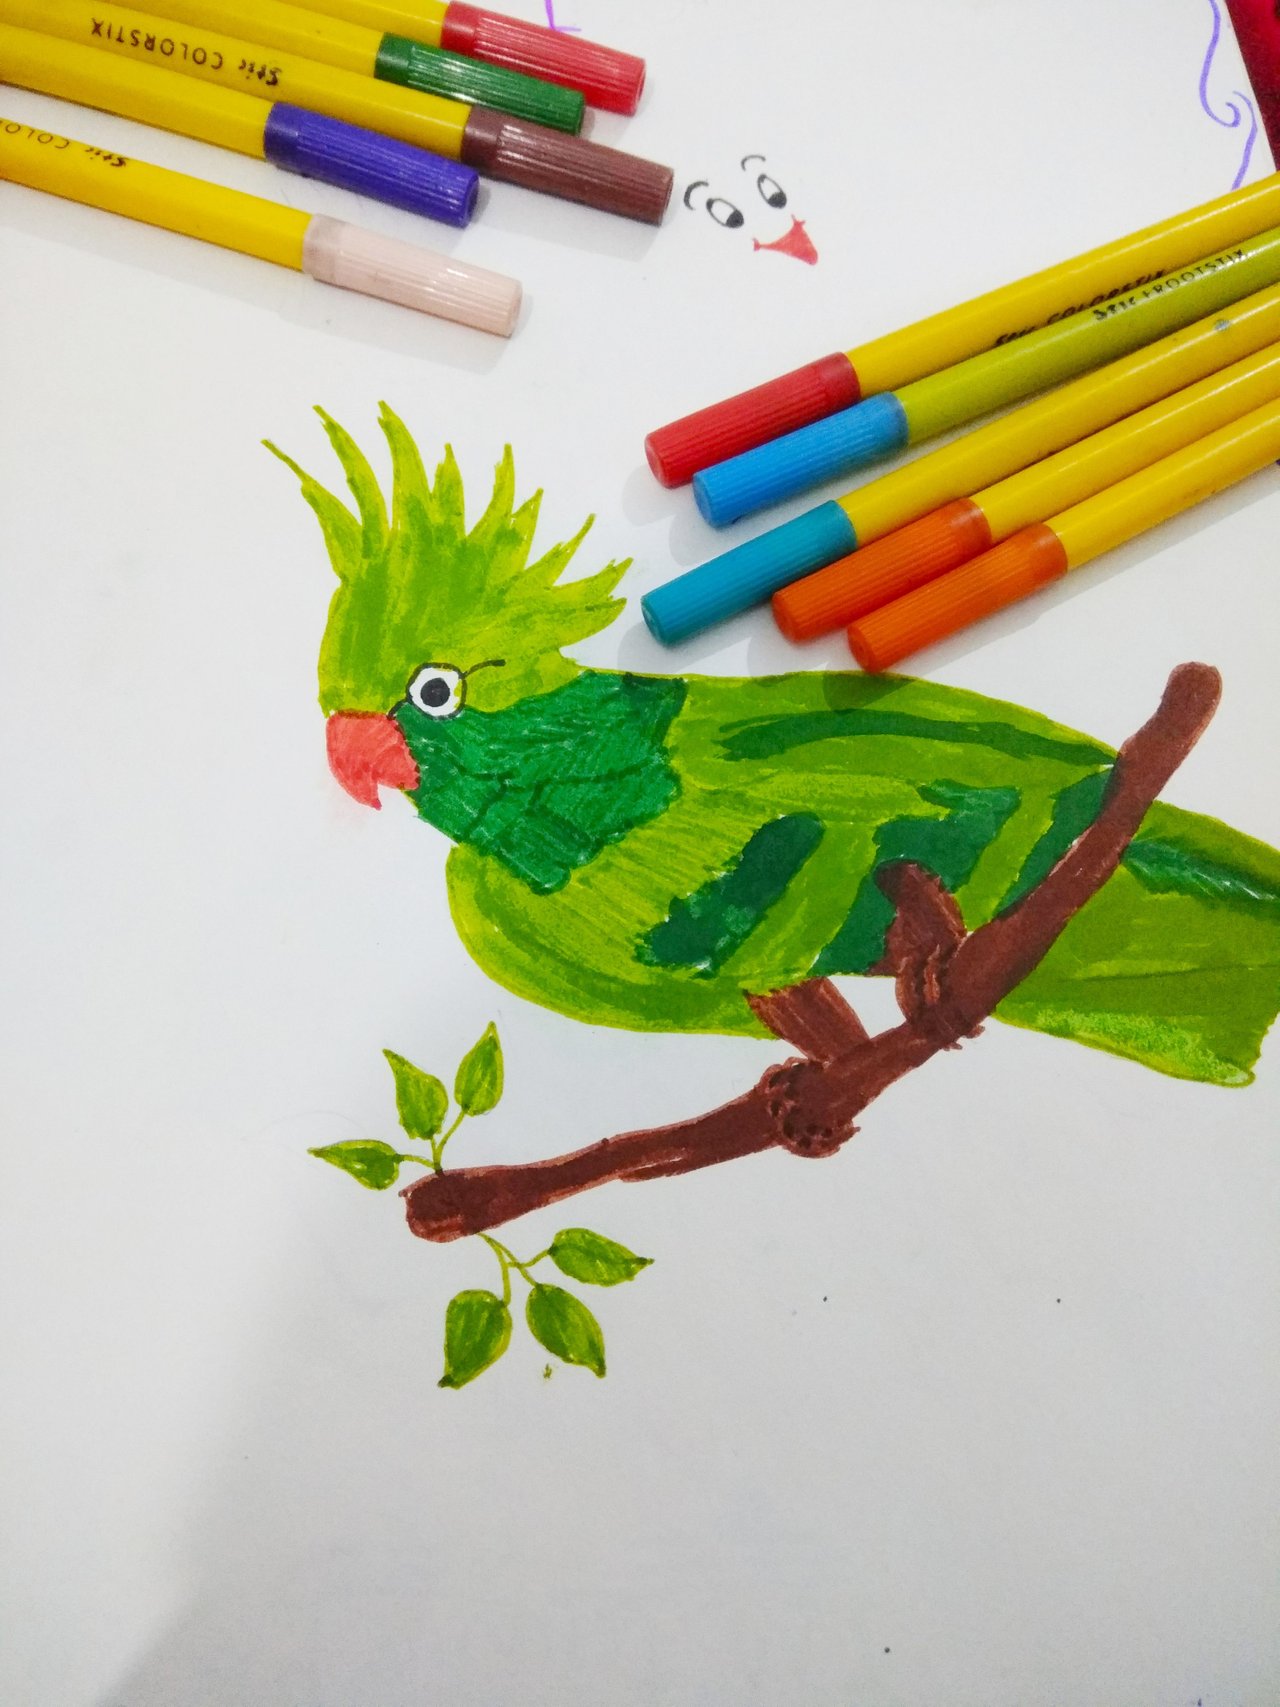 How to Draw a Simple Parrot for Kids